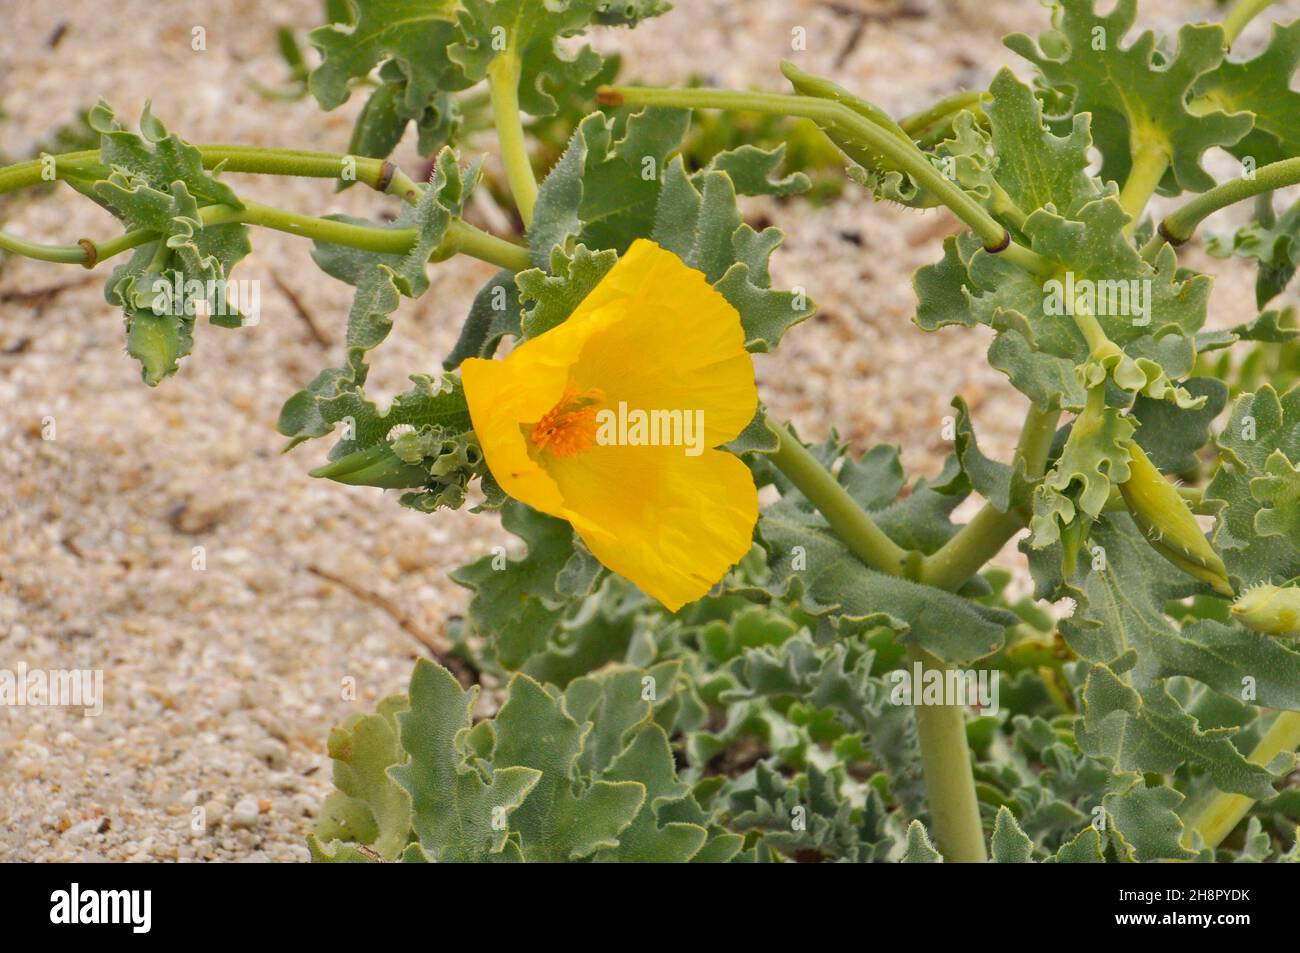 Yellow Horned-poppy 'Glaucium flavum', coastal flower found on shingle, cliffs and sandy beaches. Thick bluish leaves with bristly hairs. Flowers from Stock Photo